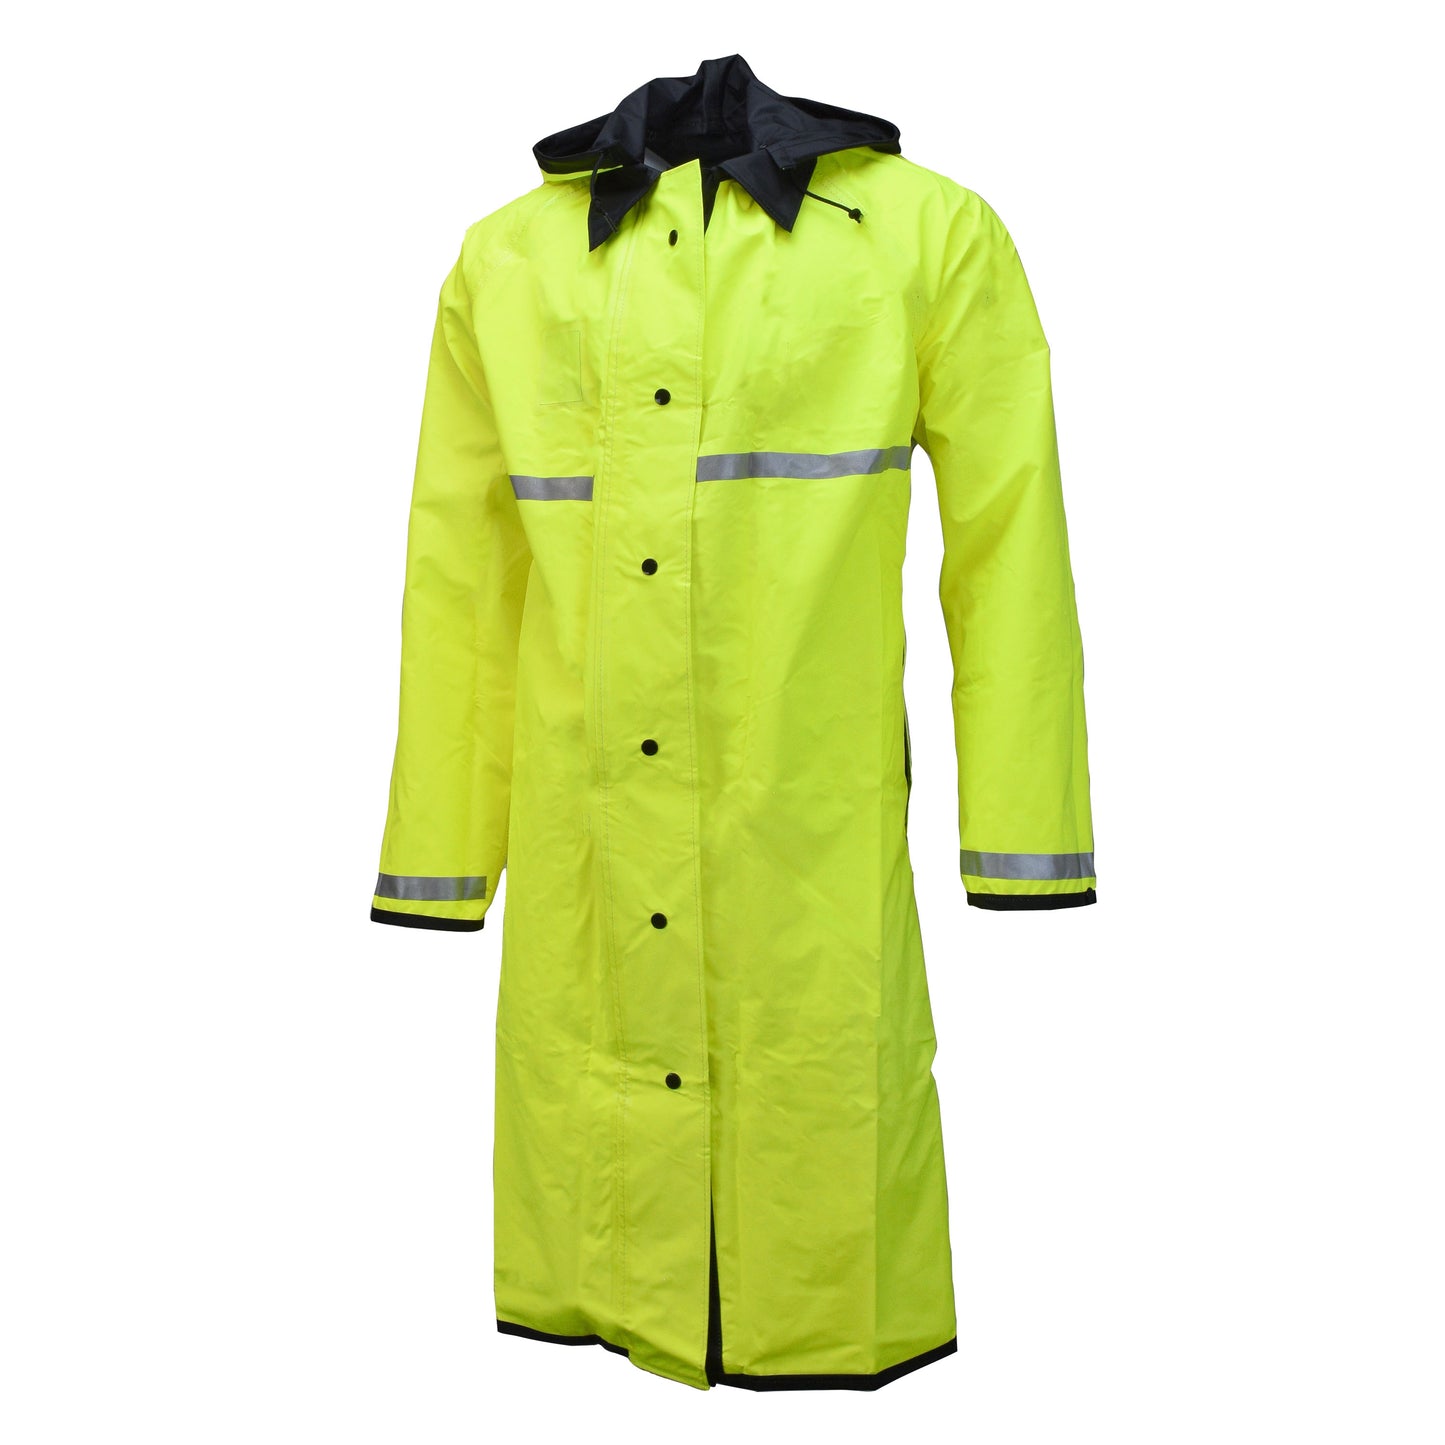 Neese 475 Duty Series Reversible Coat with 3M Reflective Taping